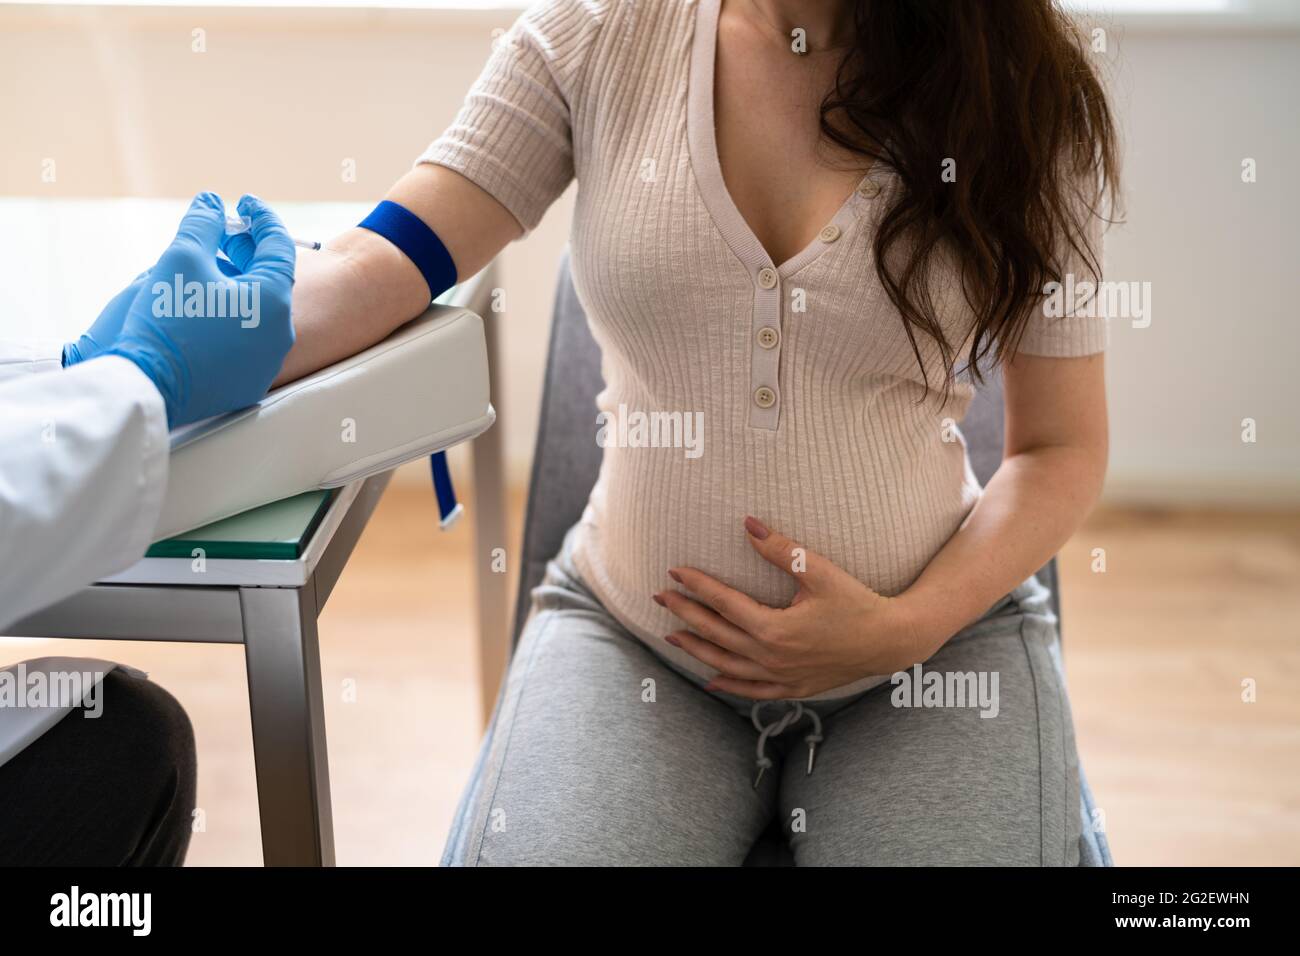 Prenatal Screening. Doctor Drawing Blood Sample From Pregnant Woman Stock Photo